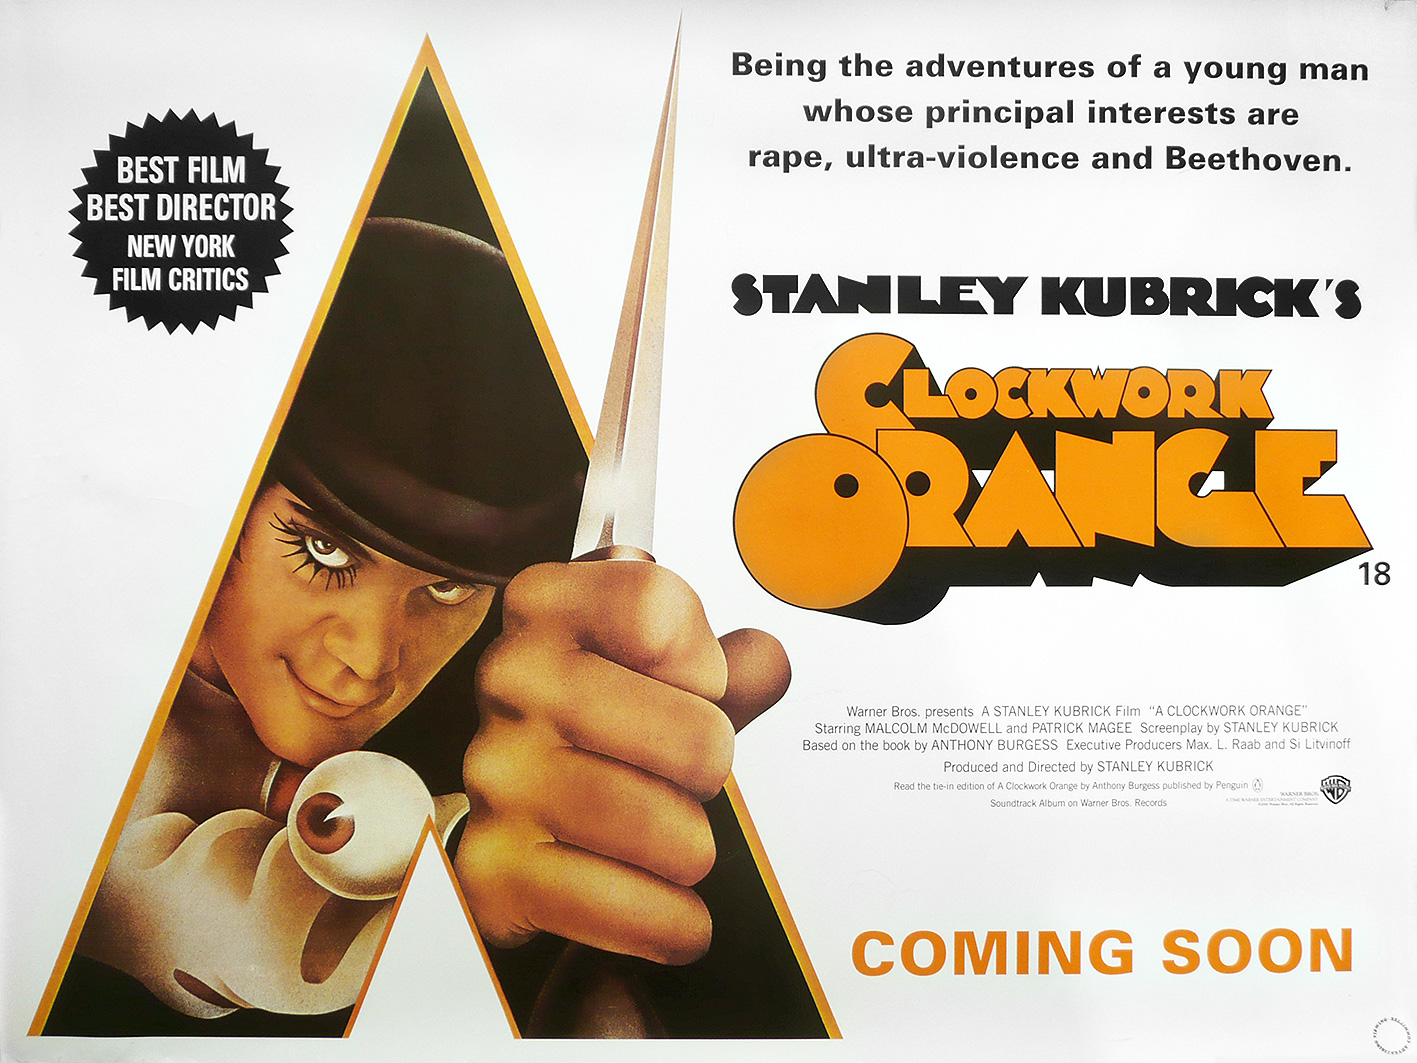 The vision of totalitarianism in a clockwork orange by anthony burgess